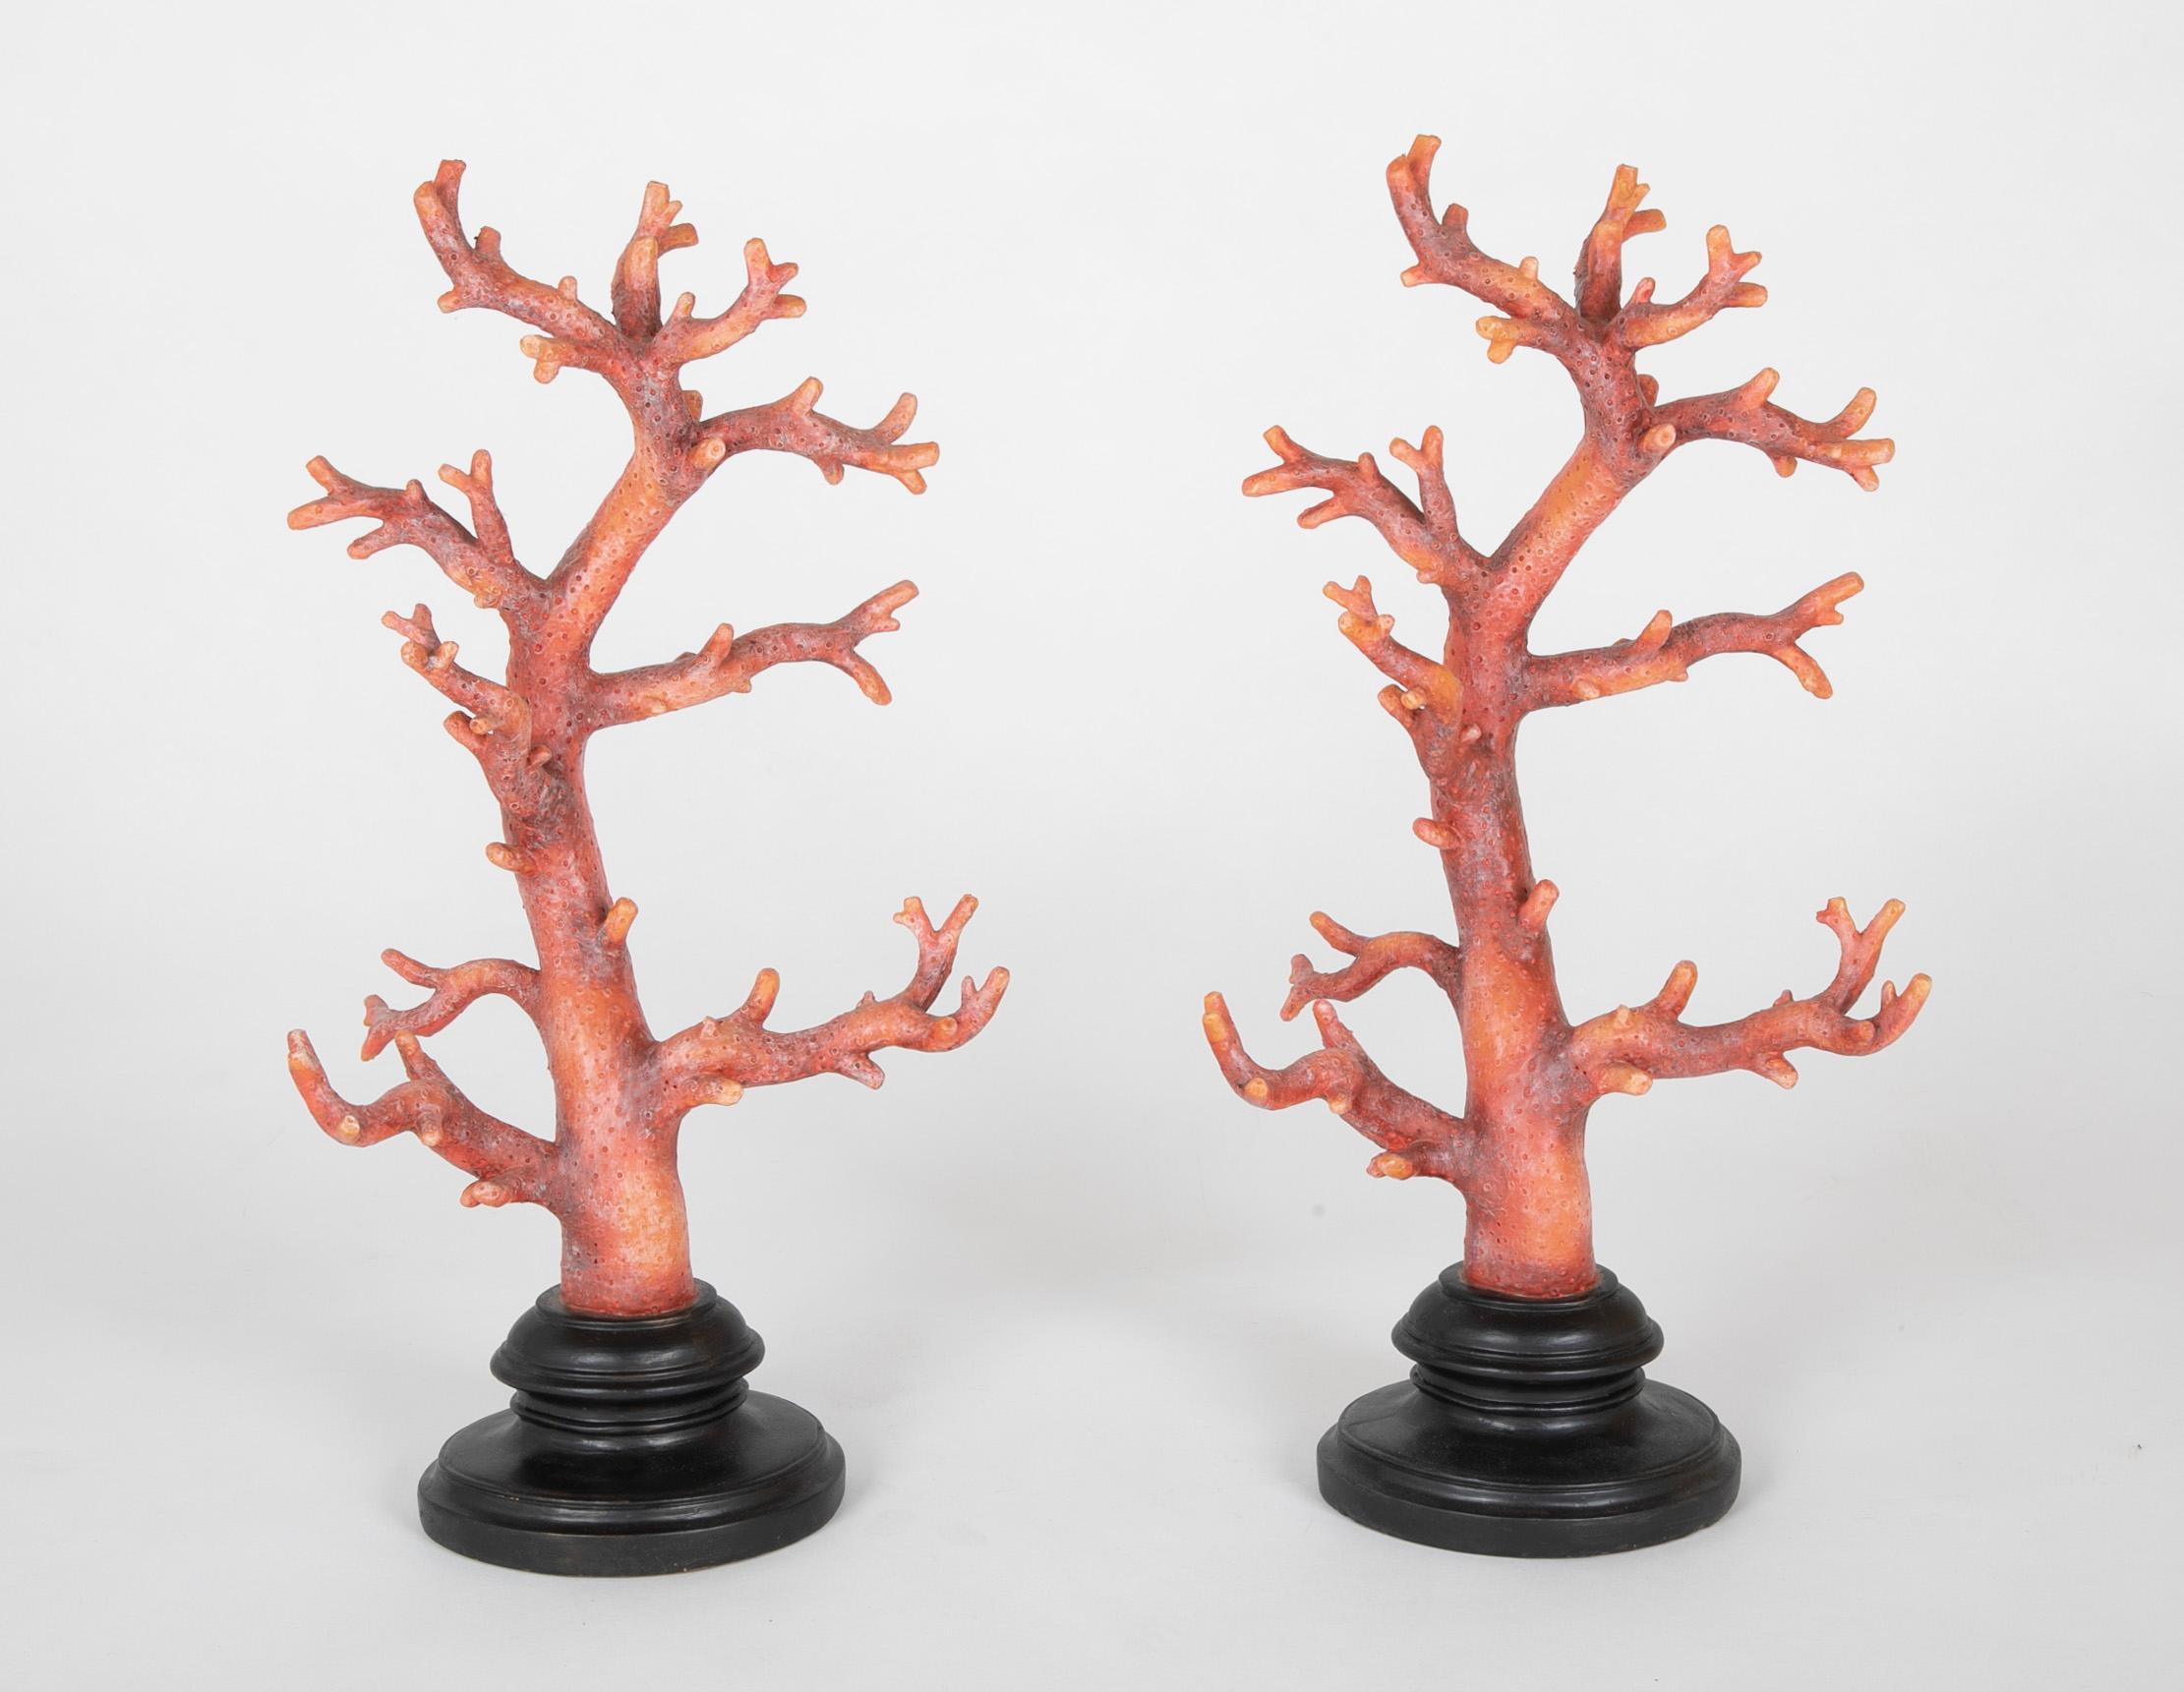 Wonderfully decorative pair of cast resin faux red coral branches on integral black oval bases. Save the endangered coral, buy these delightful replicas!
Great scale at 20 inches high by 10 wide, these are great on a mantelpiece, mid-20th century.